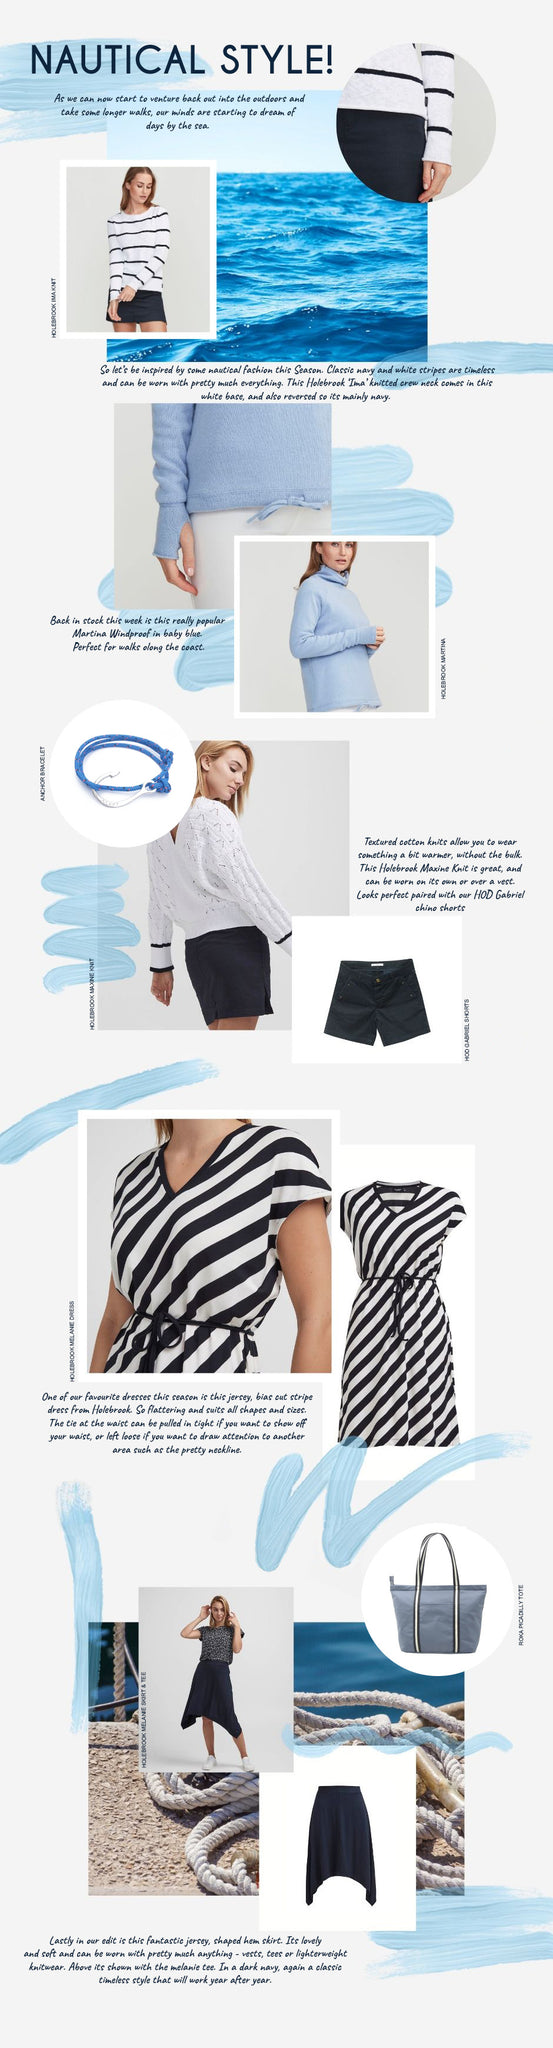 Our best of Nautical Style, breton stripes and cool crisp cottons